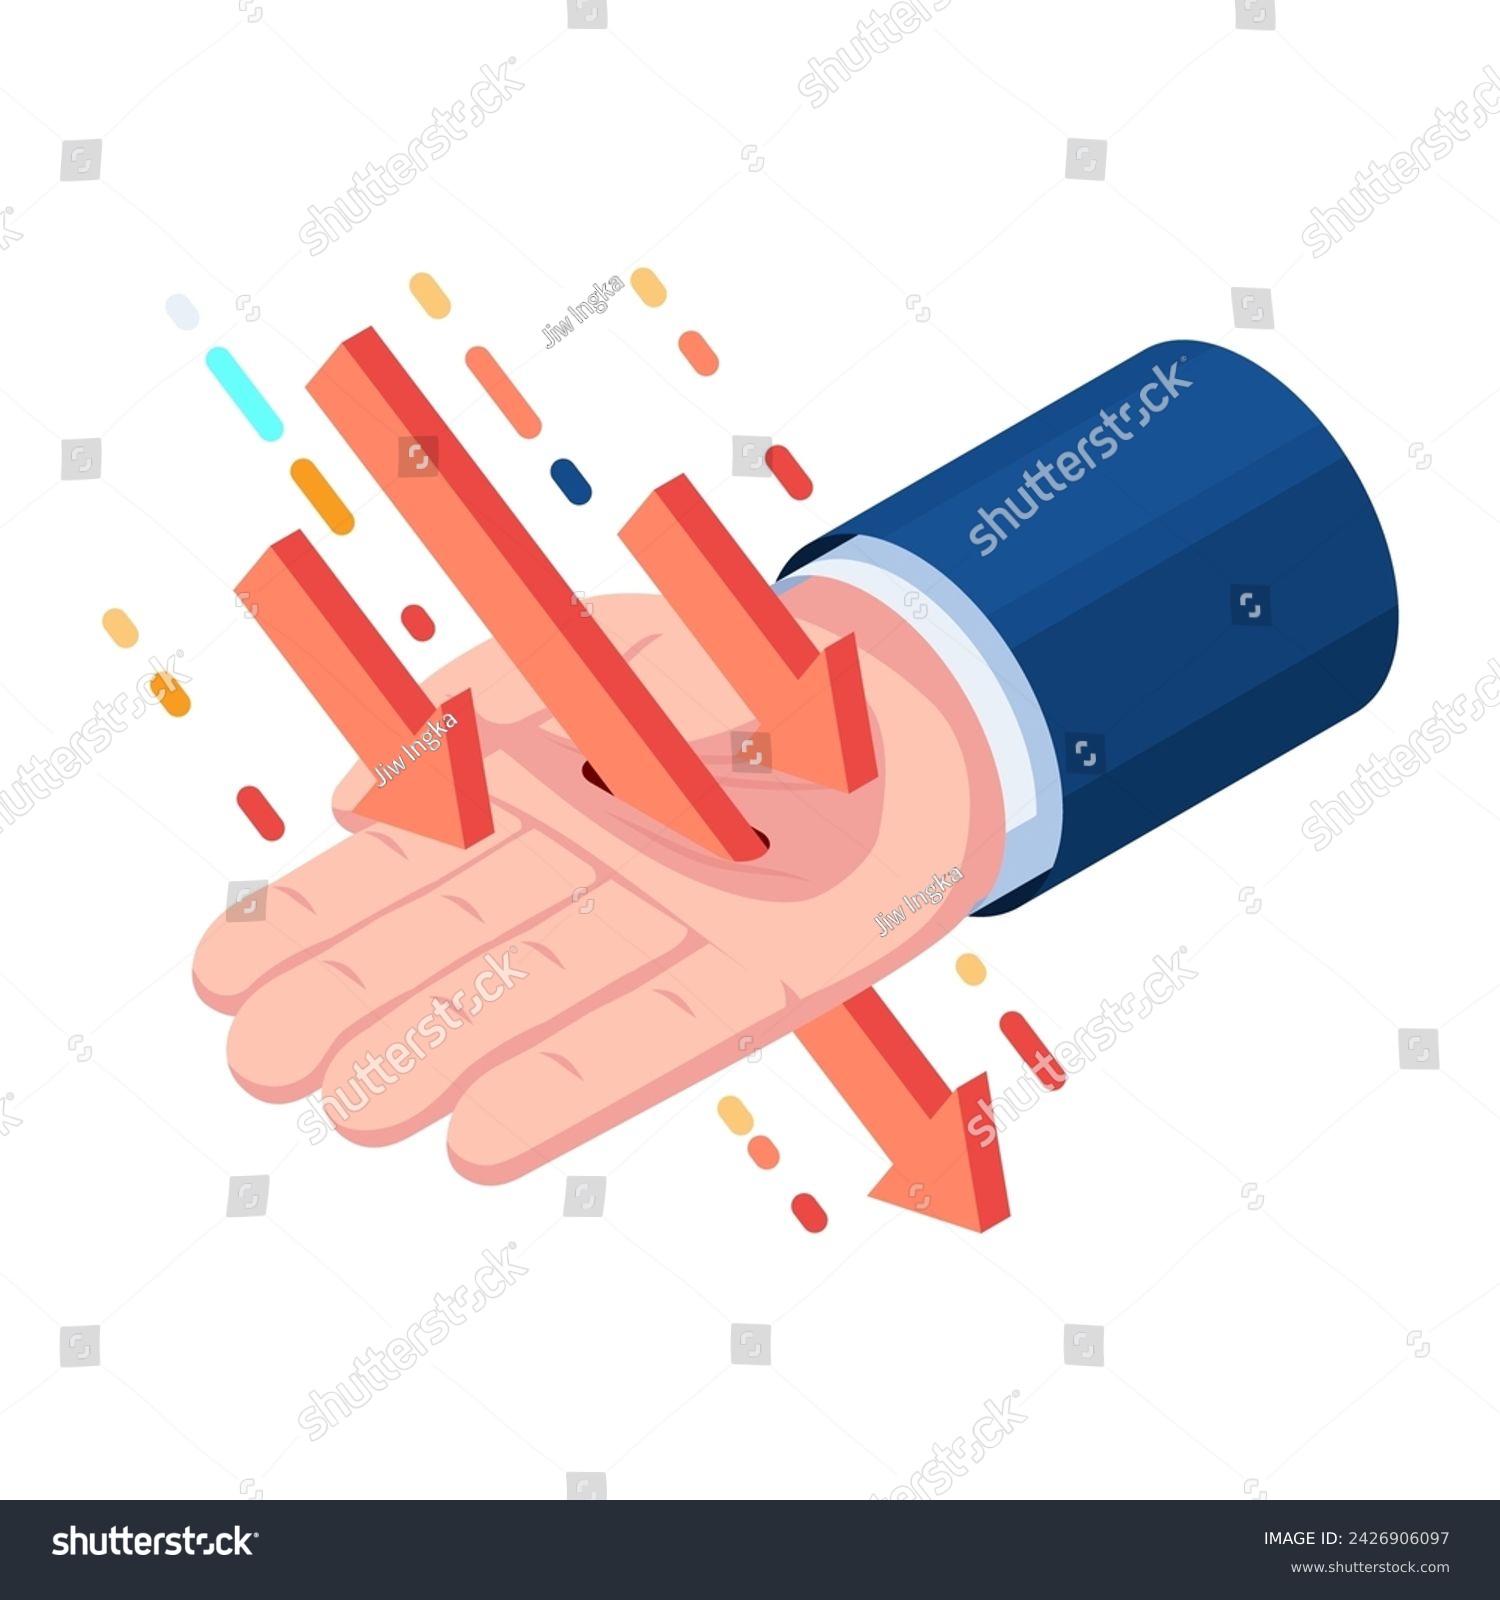 SVG of Flat 3d Isometric Falling Arrow Piercing Through Businessman Hand. Investment Risk and Downtrend Stock Market Concept. svg